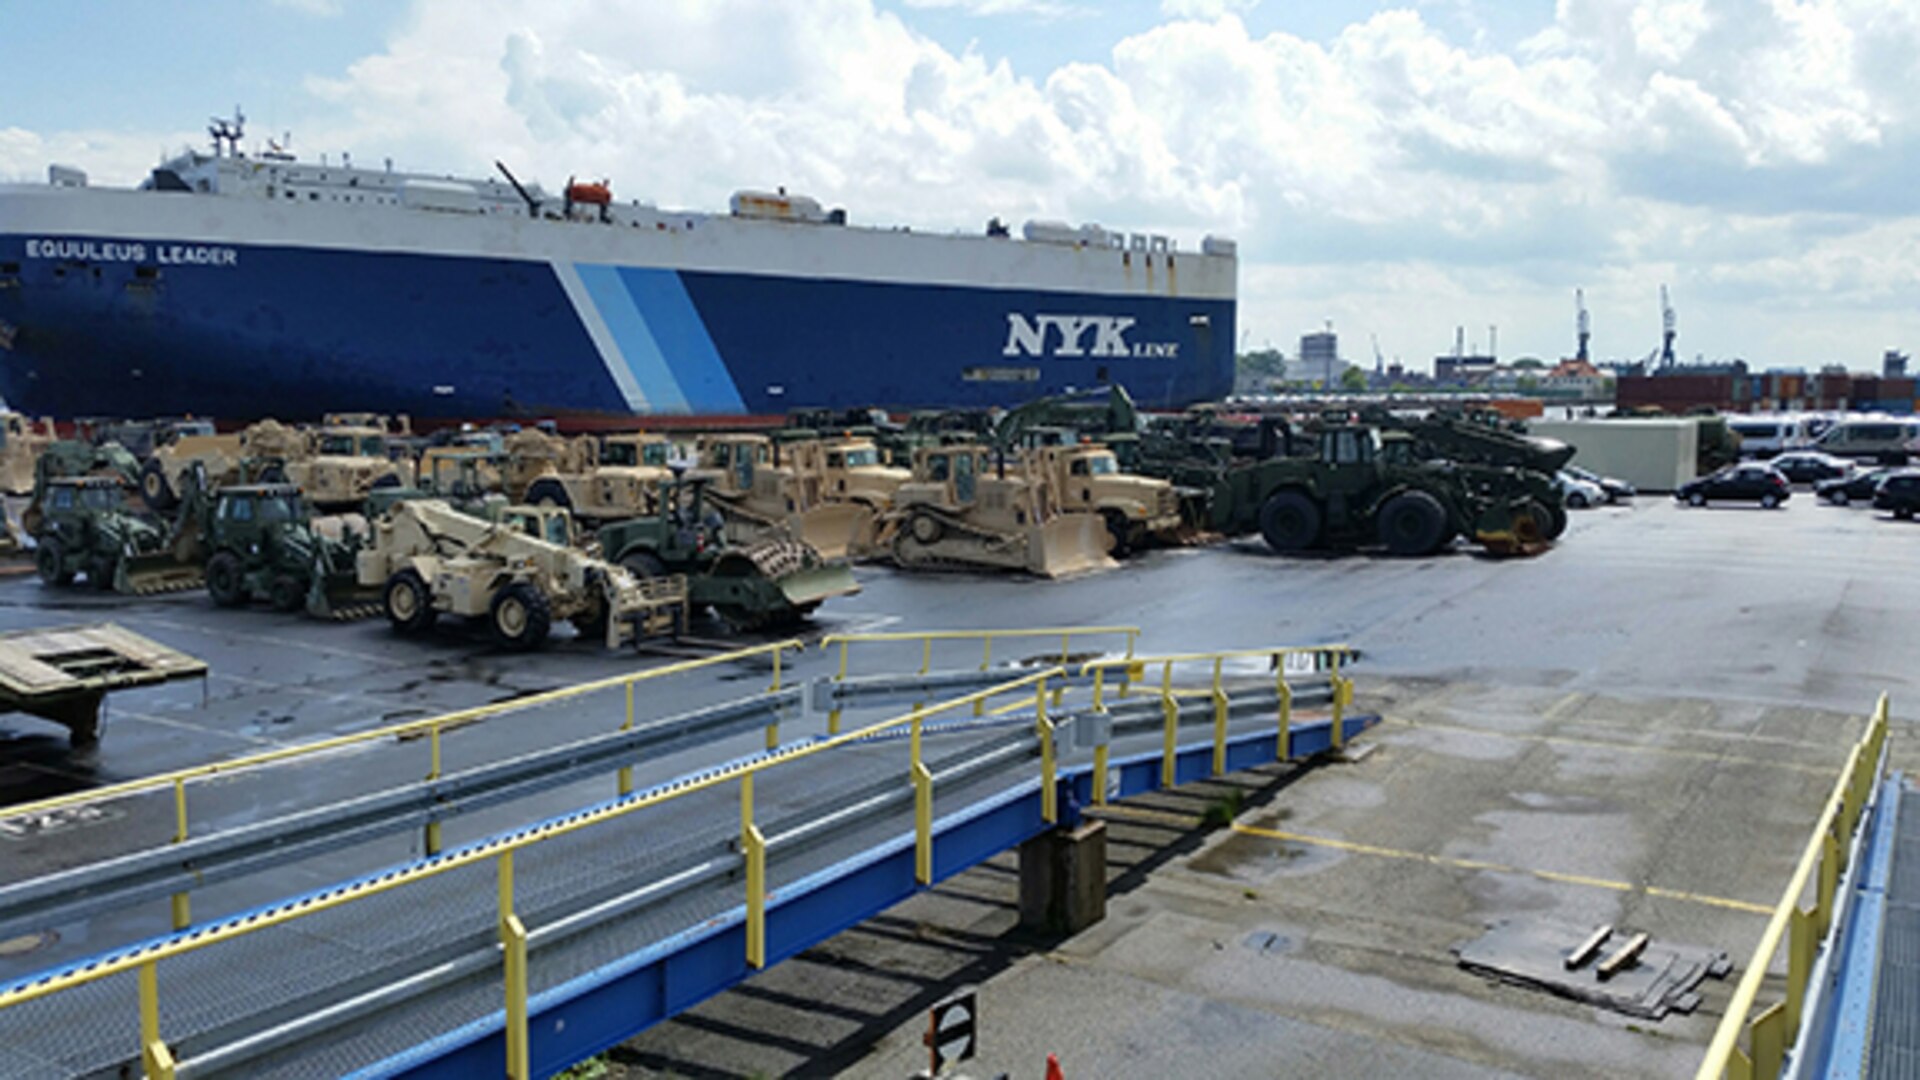 Engineering equipment from the Tennessee and Alabama National Guard is unloaded from a cargo ship in a northern German port preparing for the arrival of 1,000 military personnel to begin supporting NATO exercises.